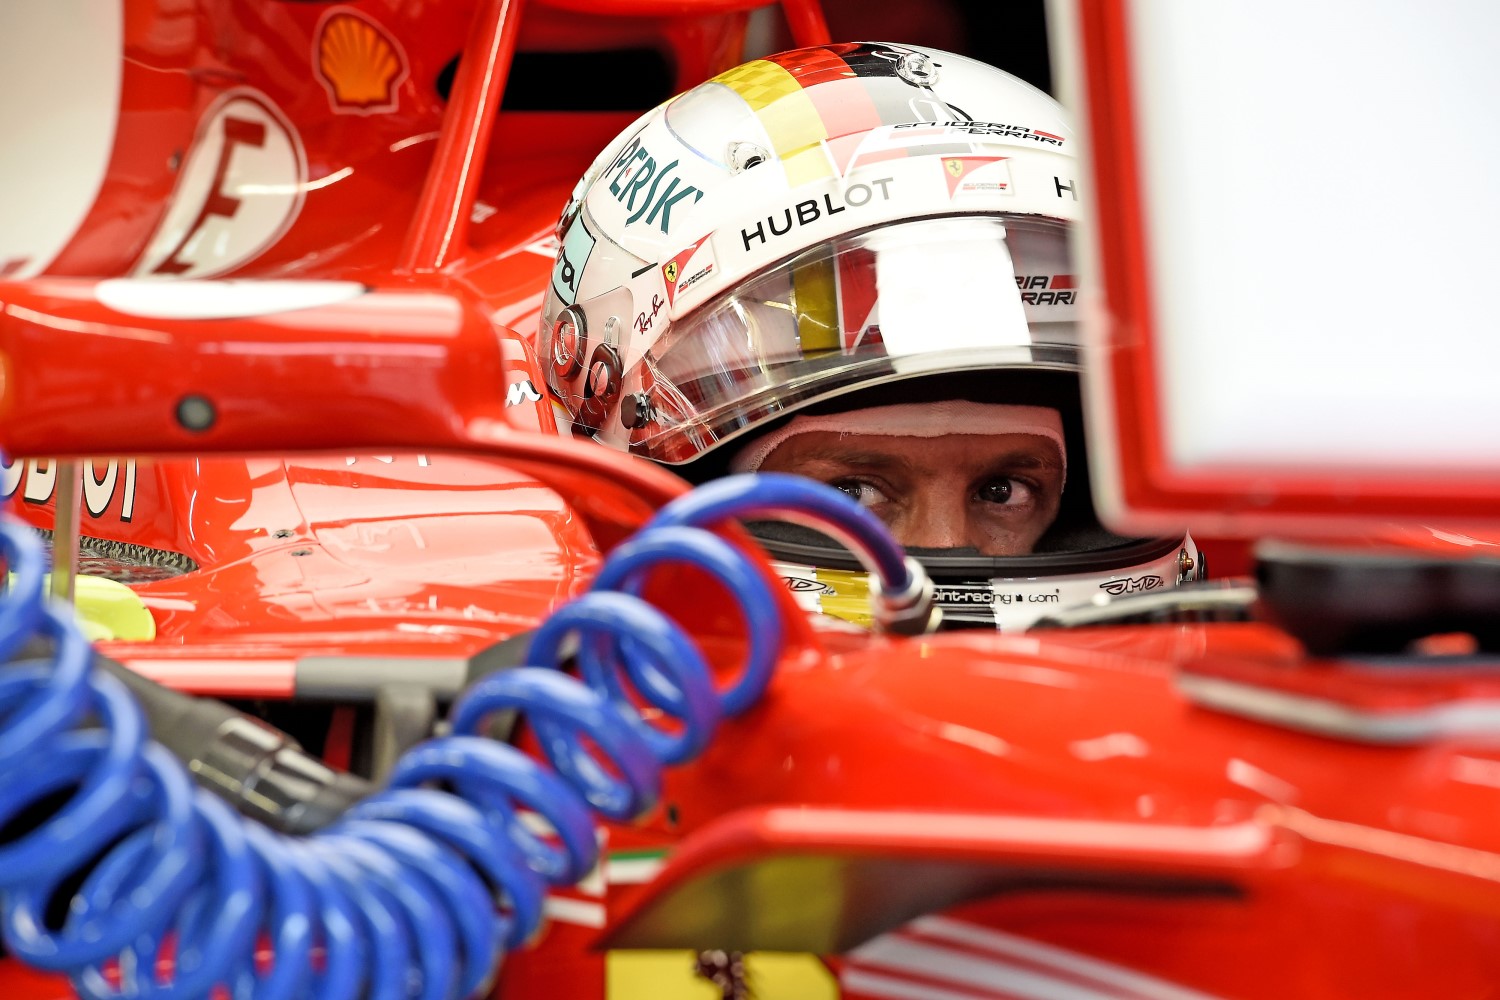 Vettel is determined but the Ferrari has become unreliable